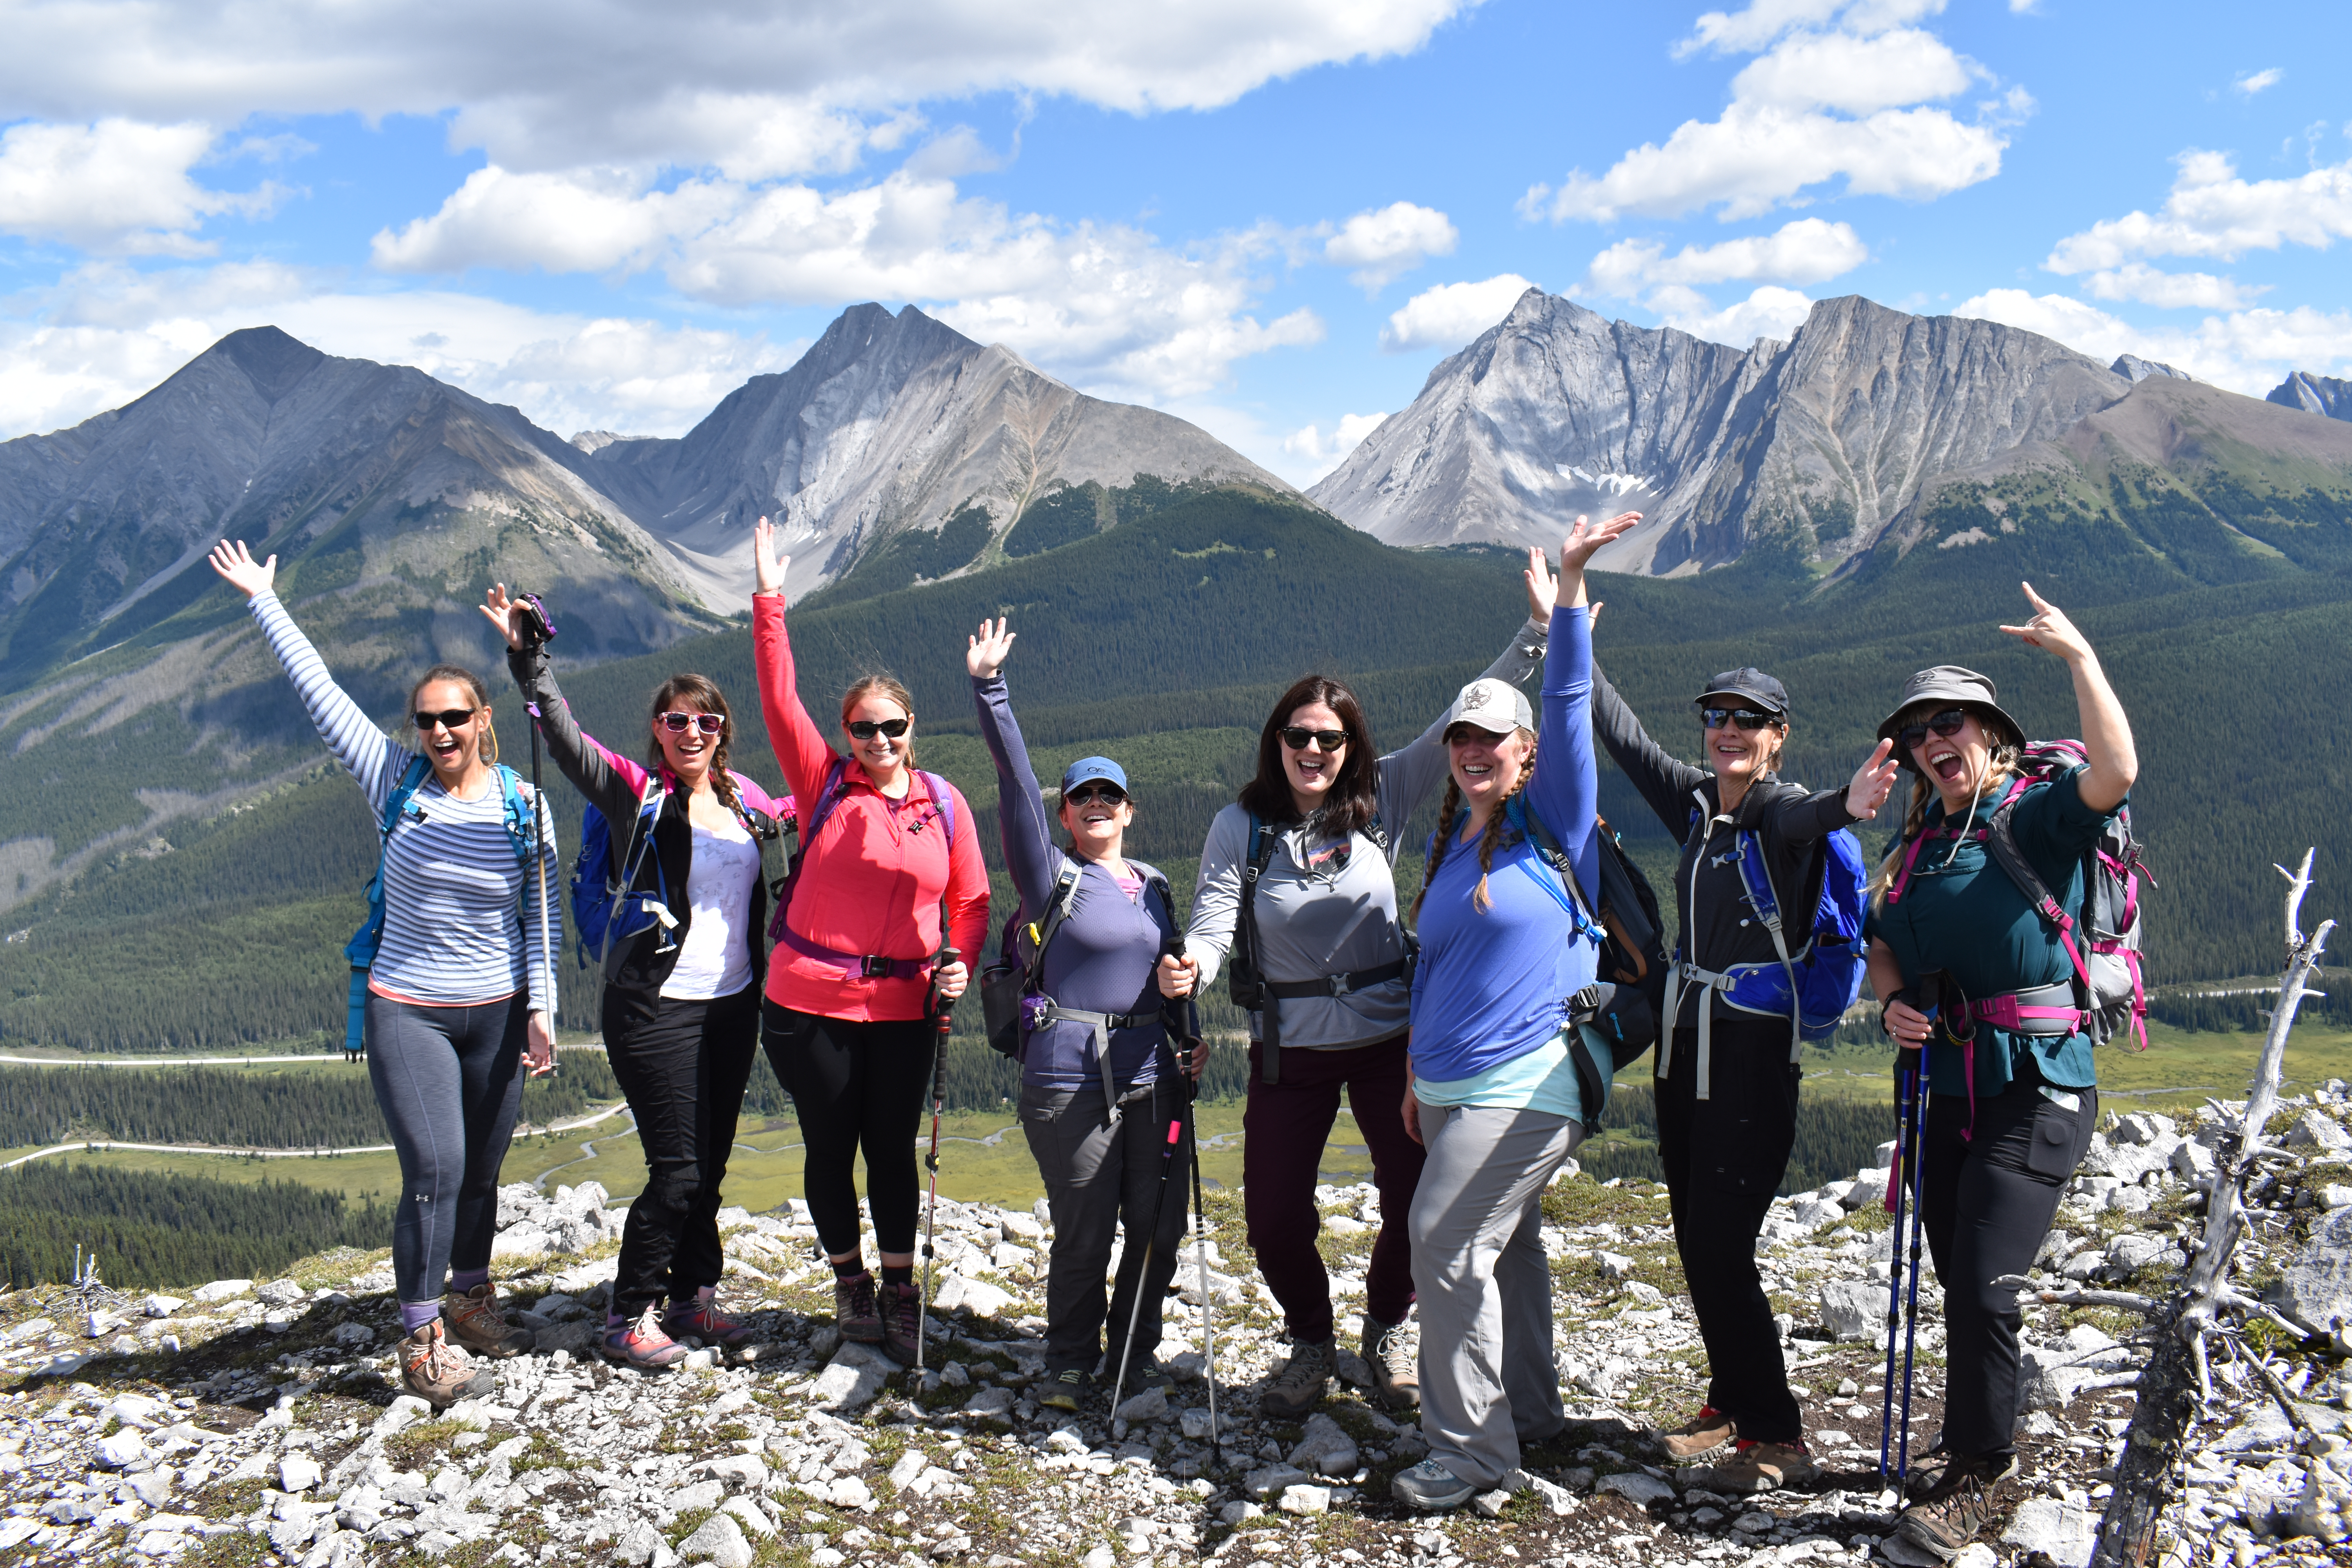 A group of Explorer Chick women raise their arms and smile at the camera while hiking on a single women group travel tour